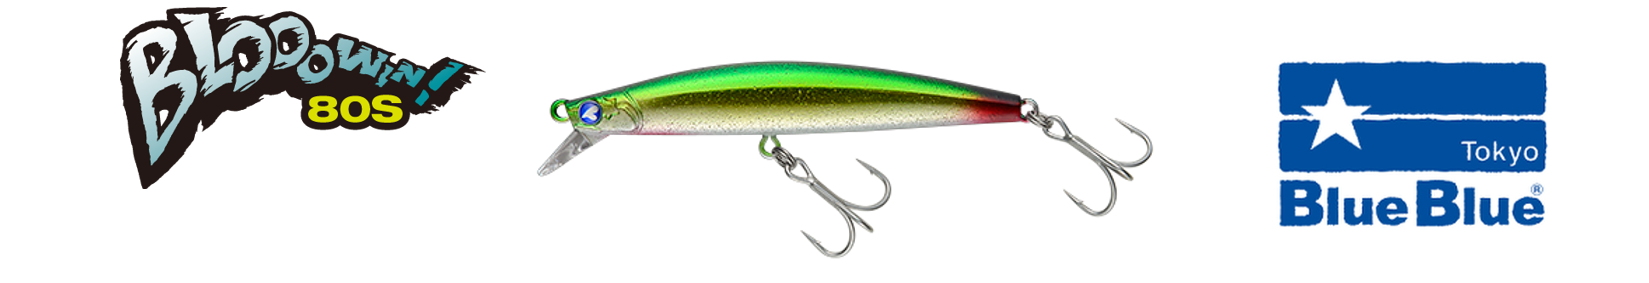 blue-blue-blooowin-85s-bass-lures.png